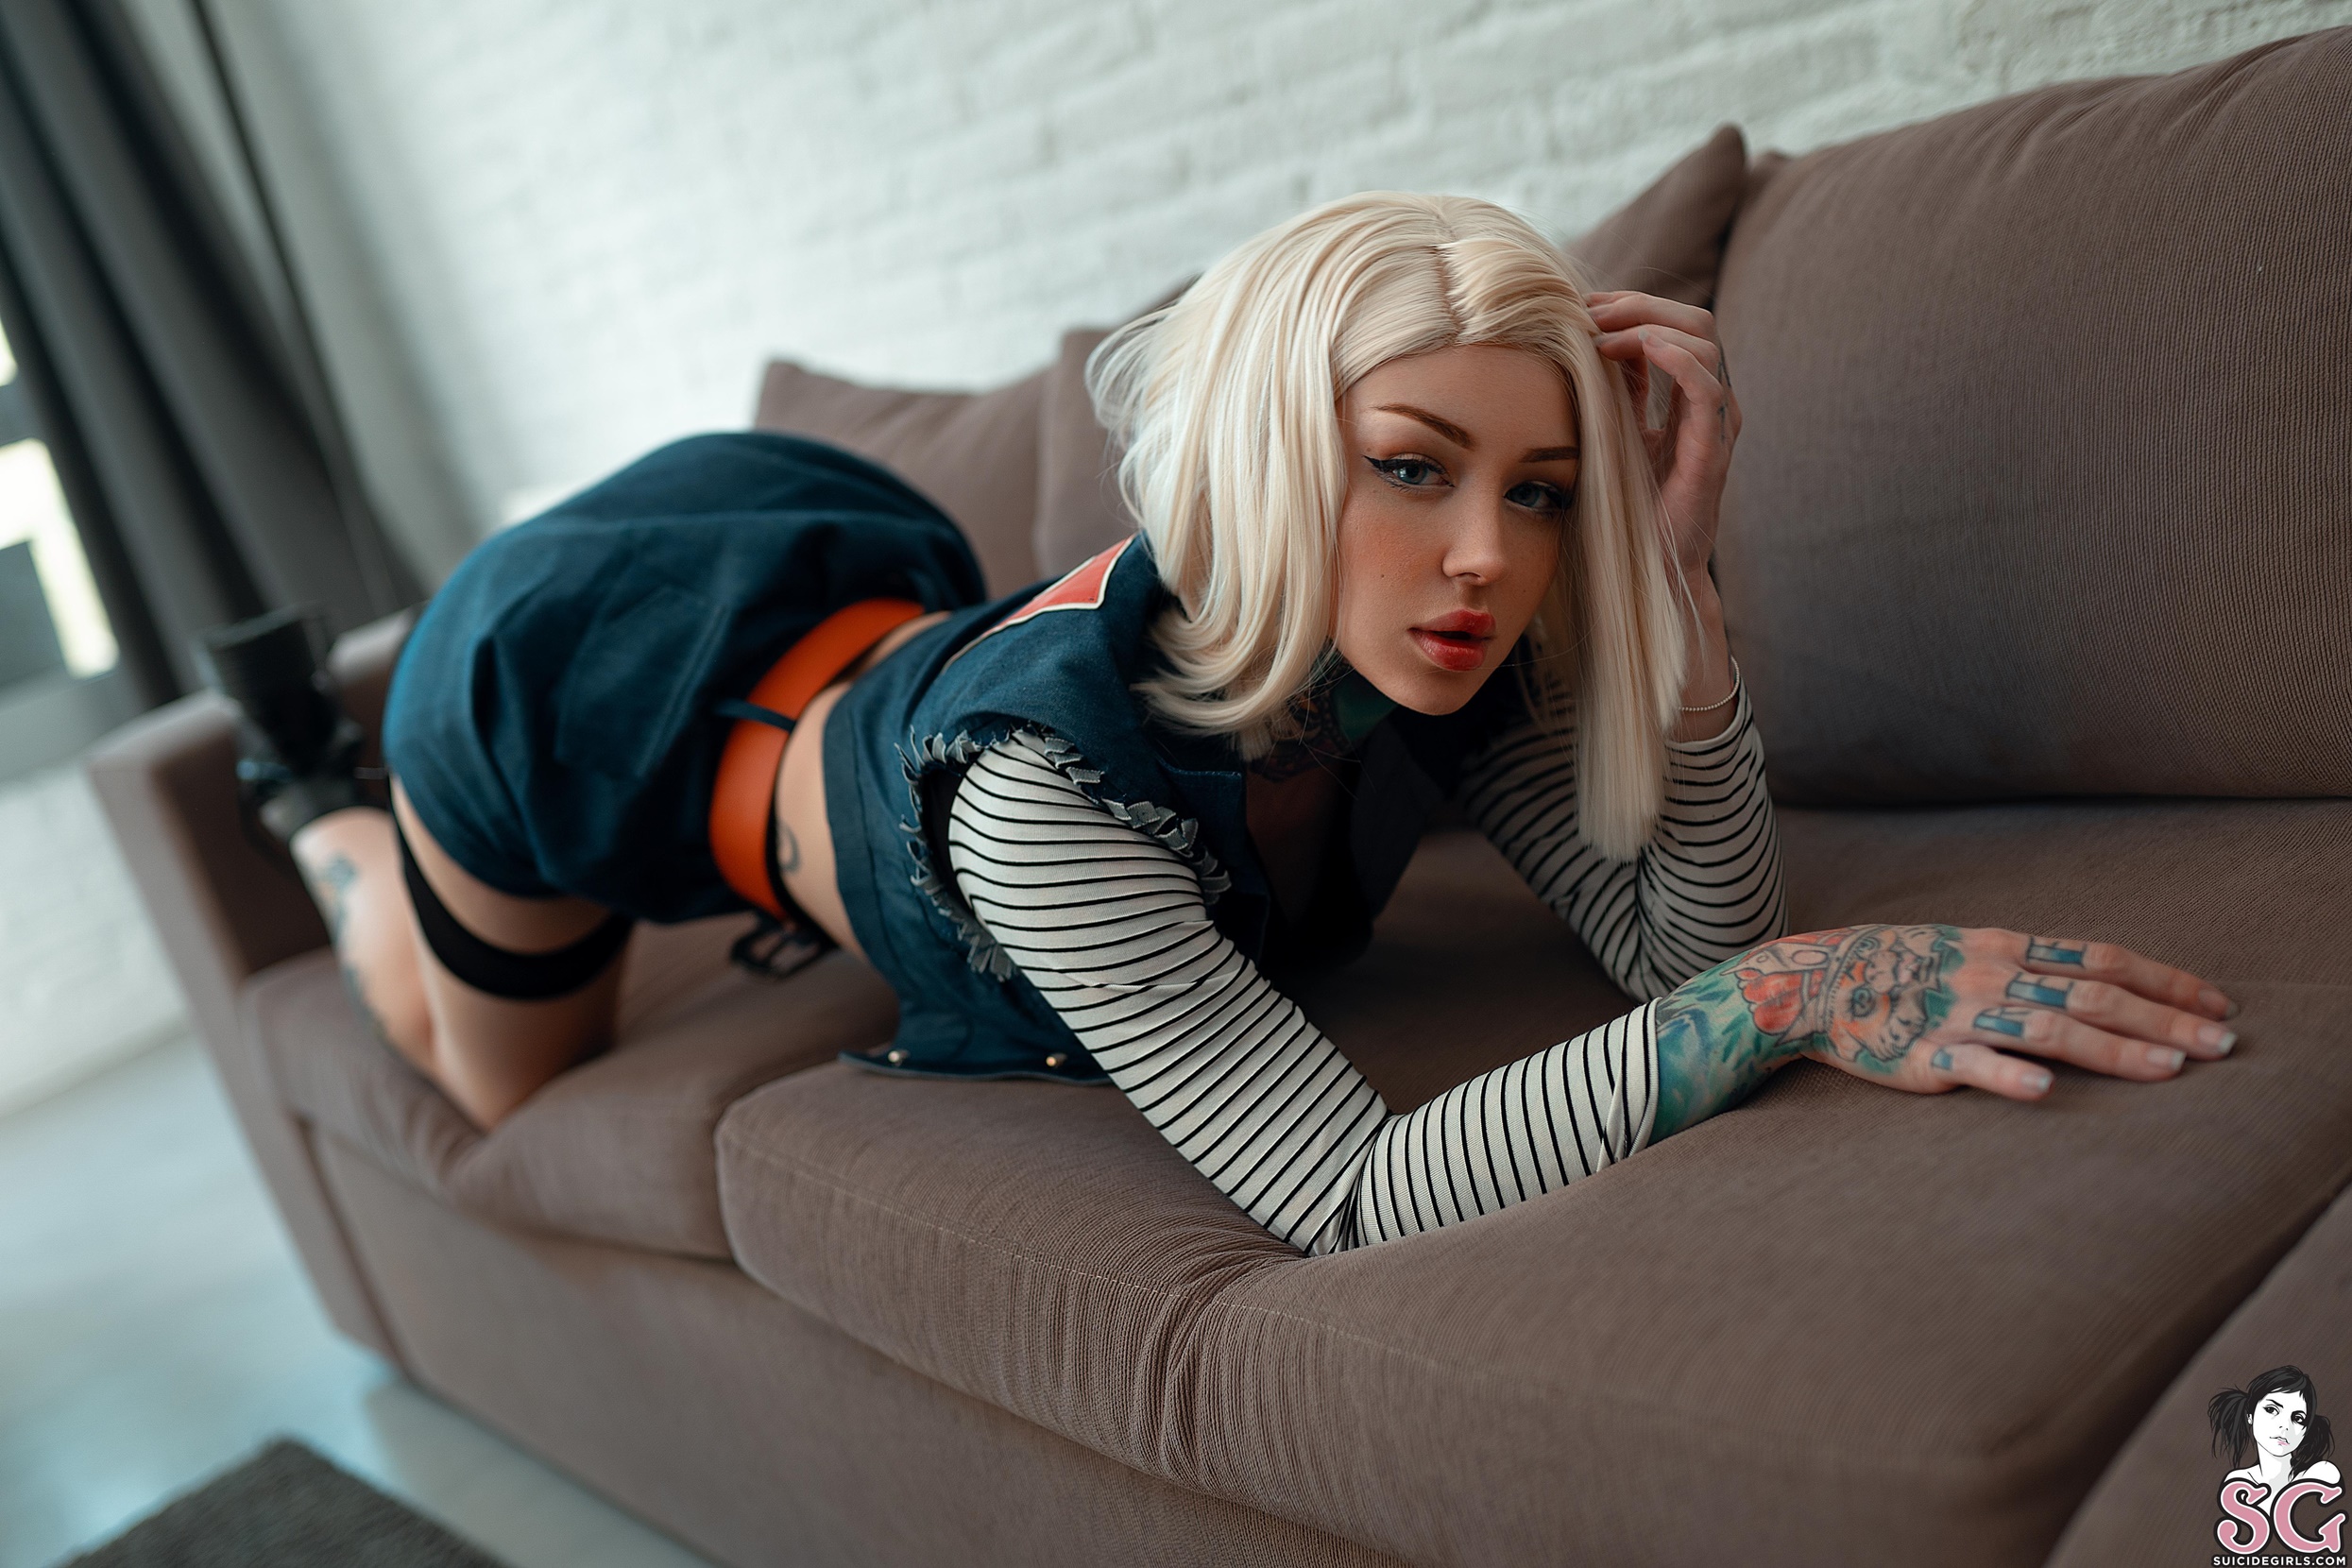 People 2490x1660 Raisie Suicide Girls blonde women model tattoo women indoors couch kneeling sensual gaze red lipstick face eyeliner looking at viewer watermarked whole body